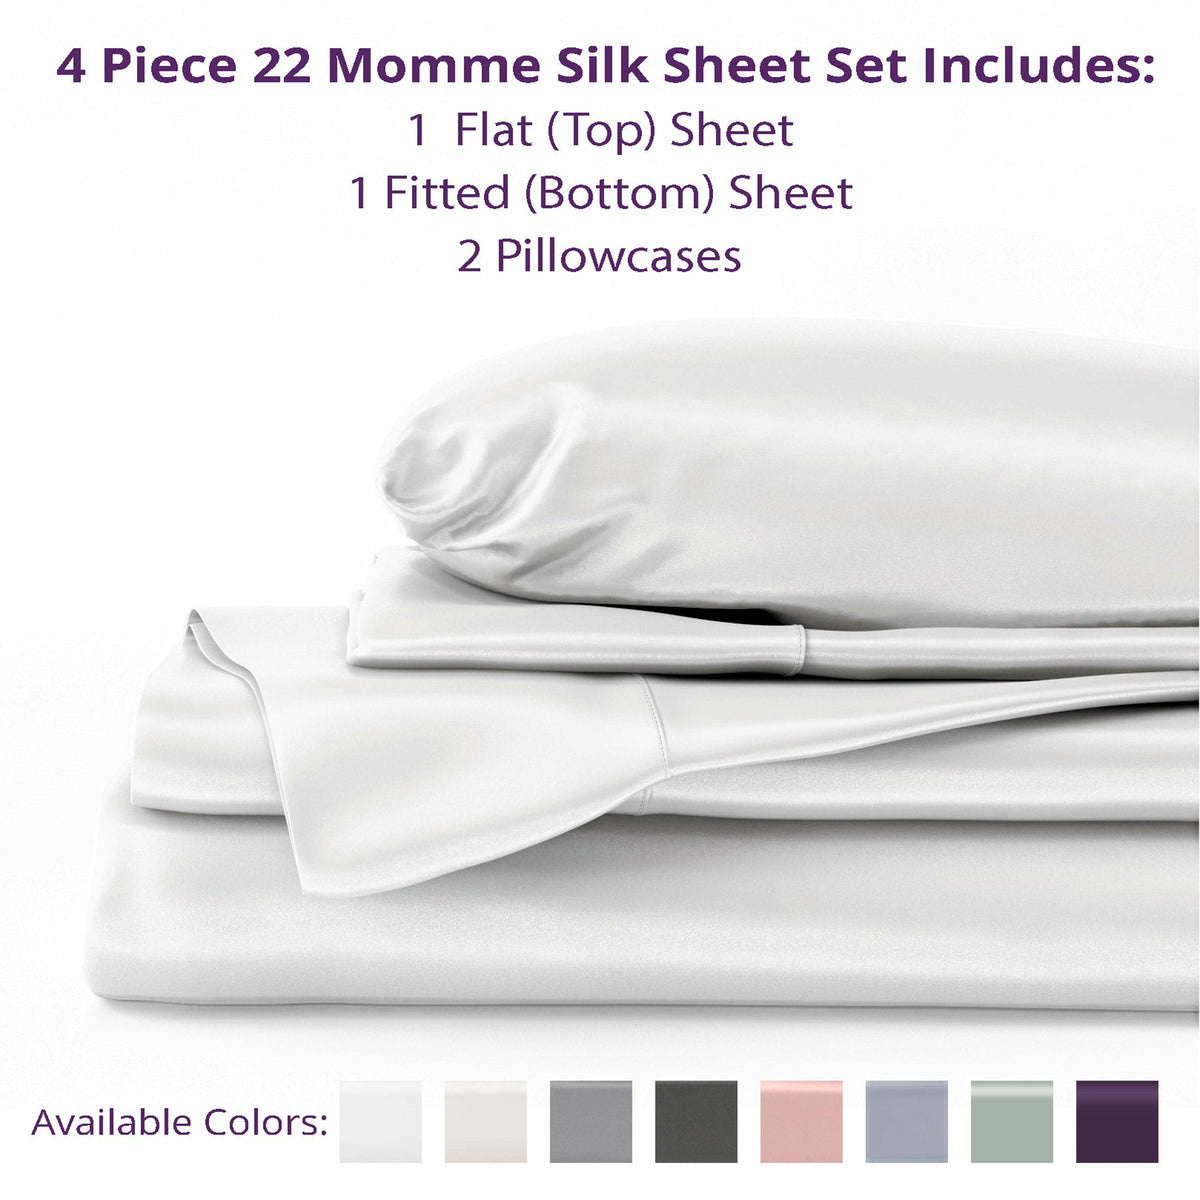 Mulberry Park Silks 22 Momme Silk Fitted Sheets Inclusions Fine Linens